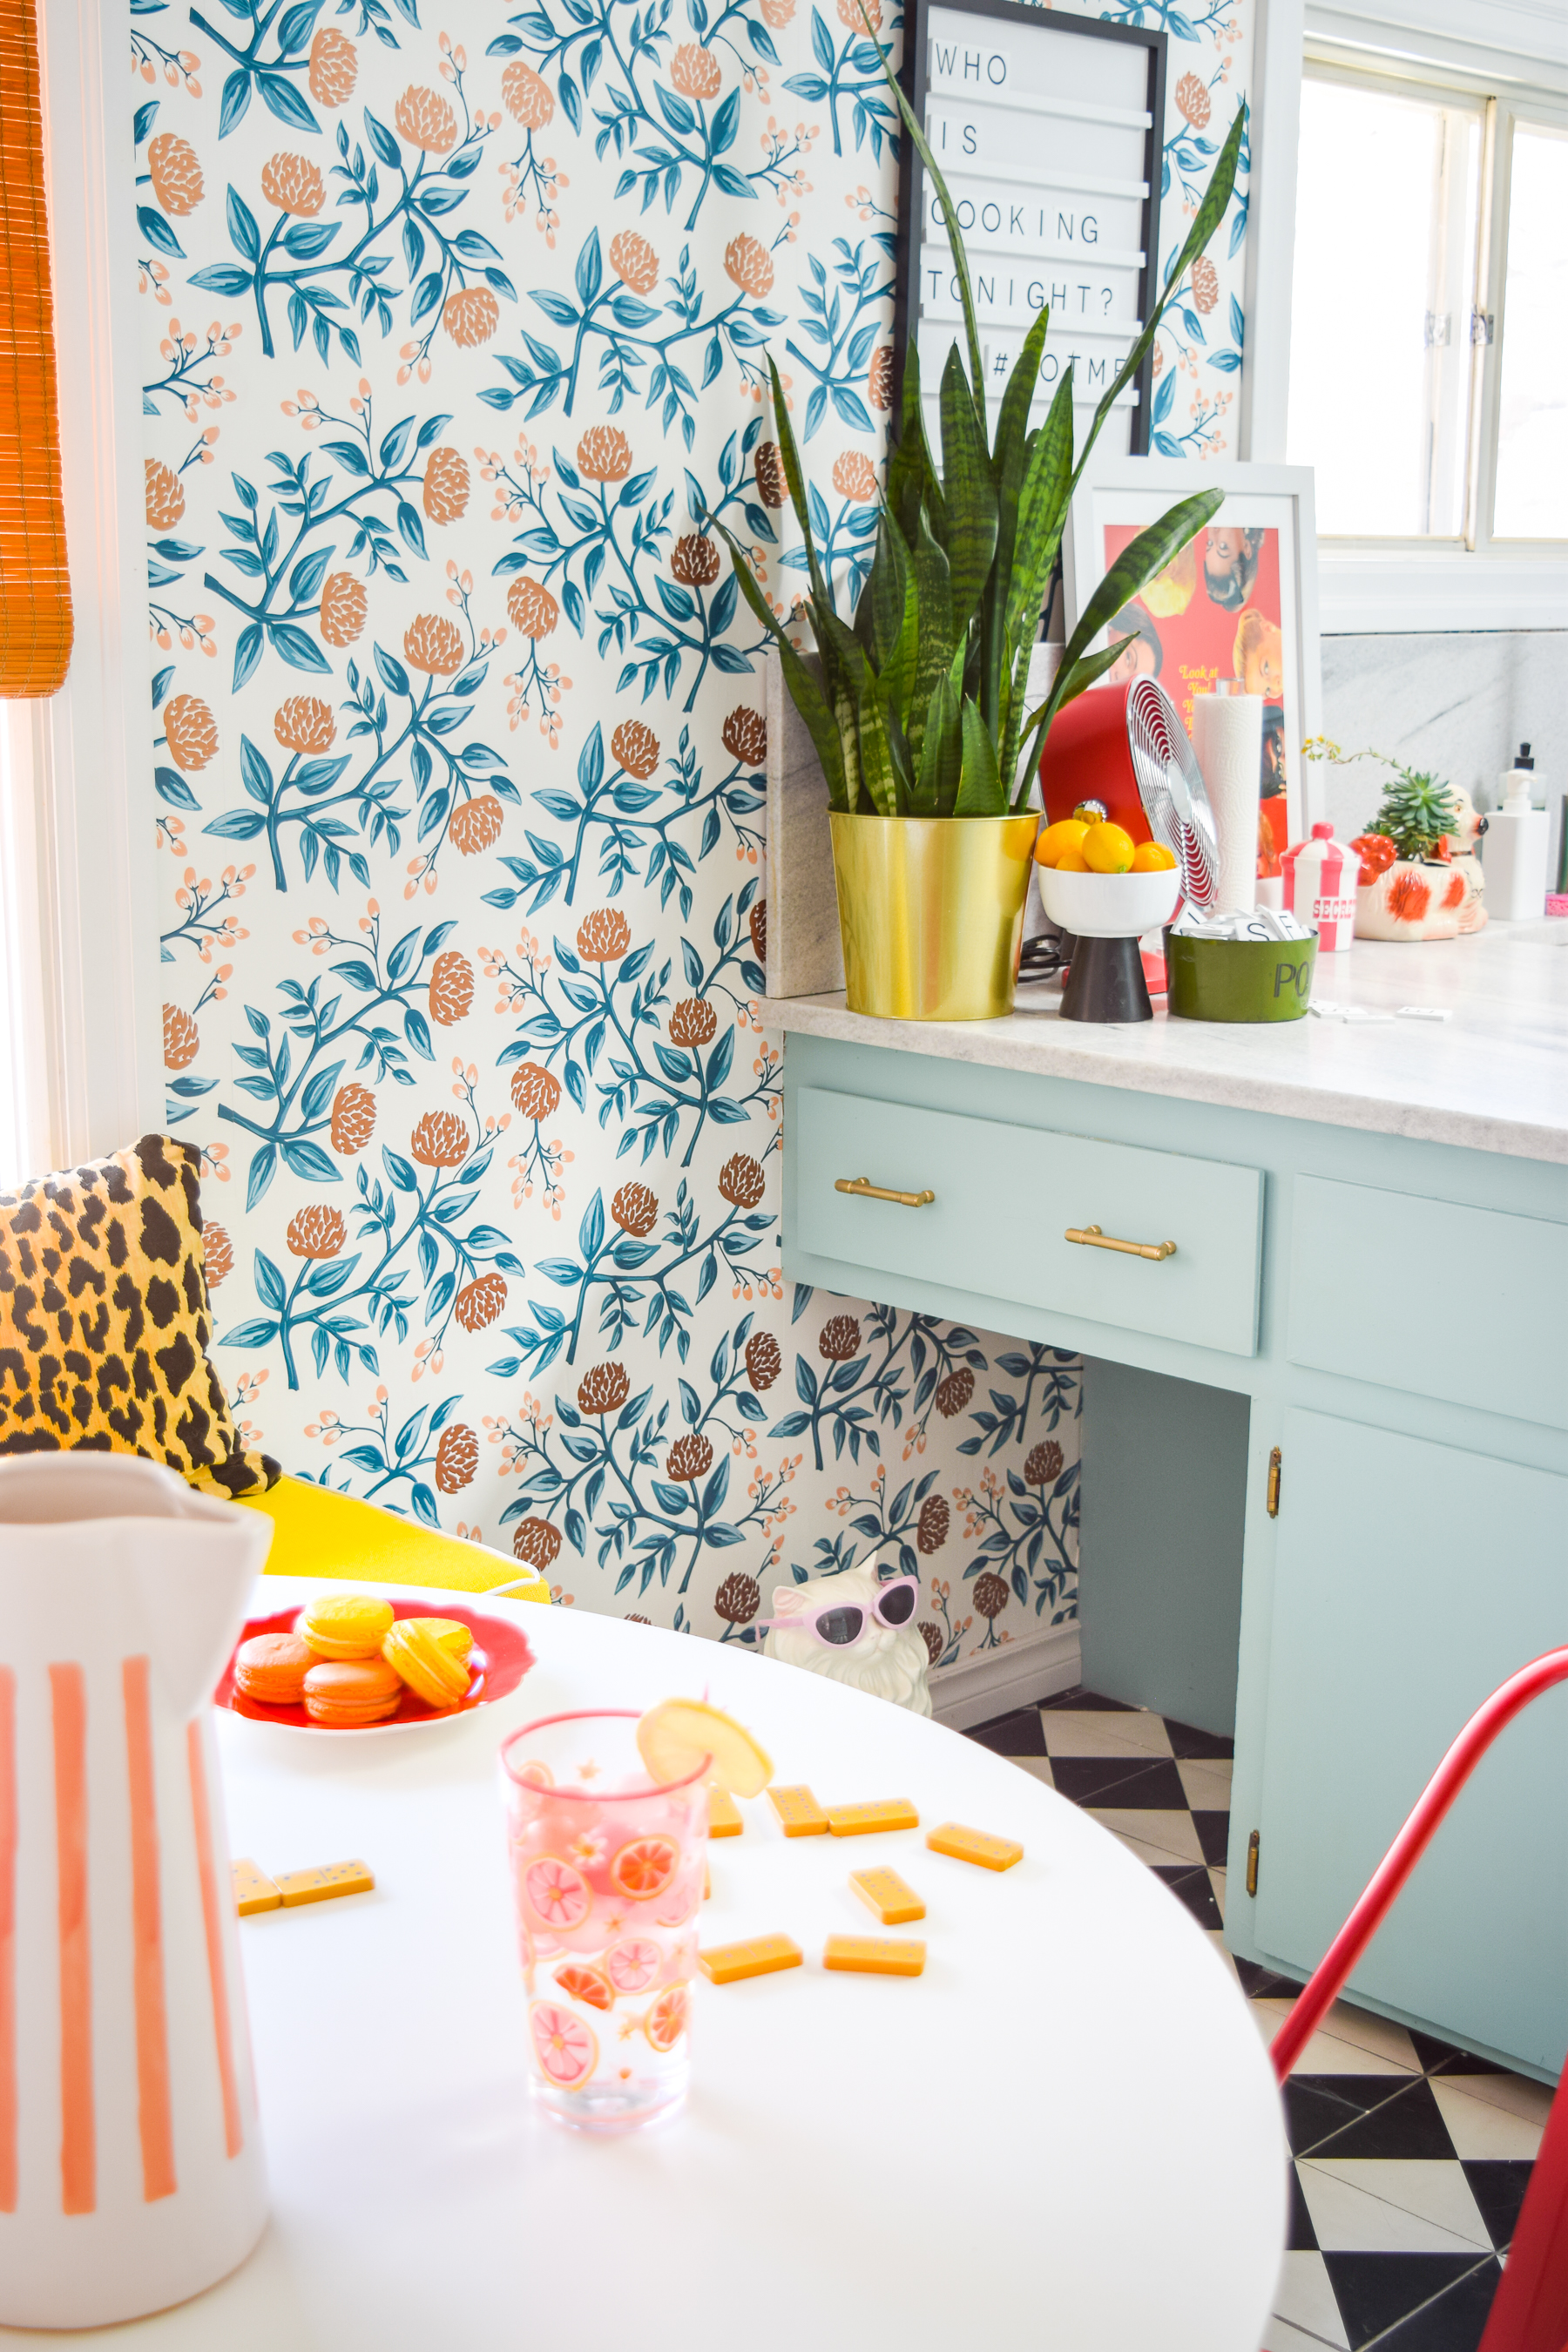 Our retro glam kitchen renovations are done! Come see how we transformed our dated kitchen, into a modern oasis, full of colour and pattern.